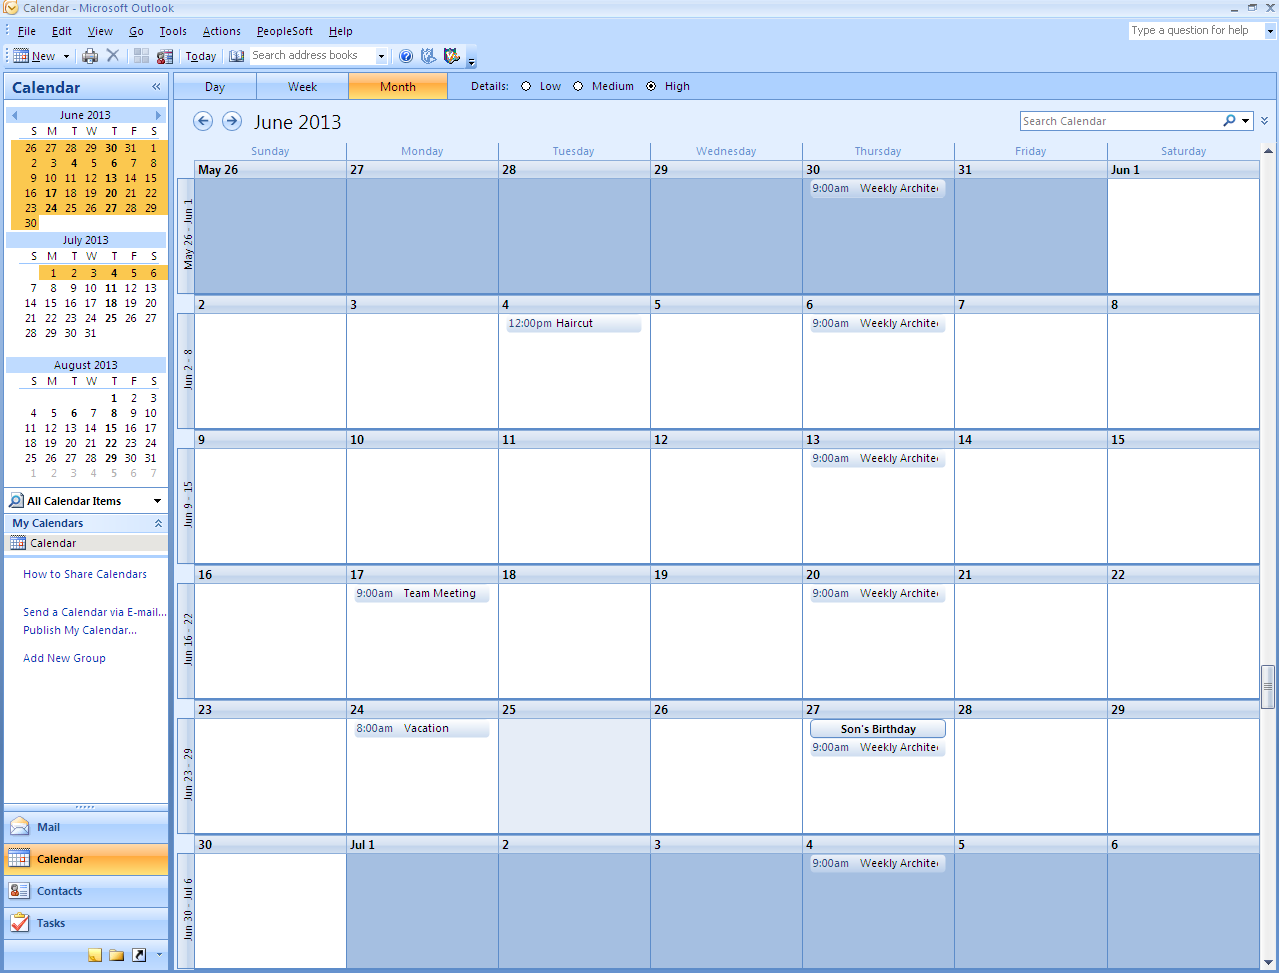 Monthly Calendar View in Microsoft Outlook